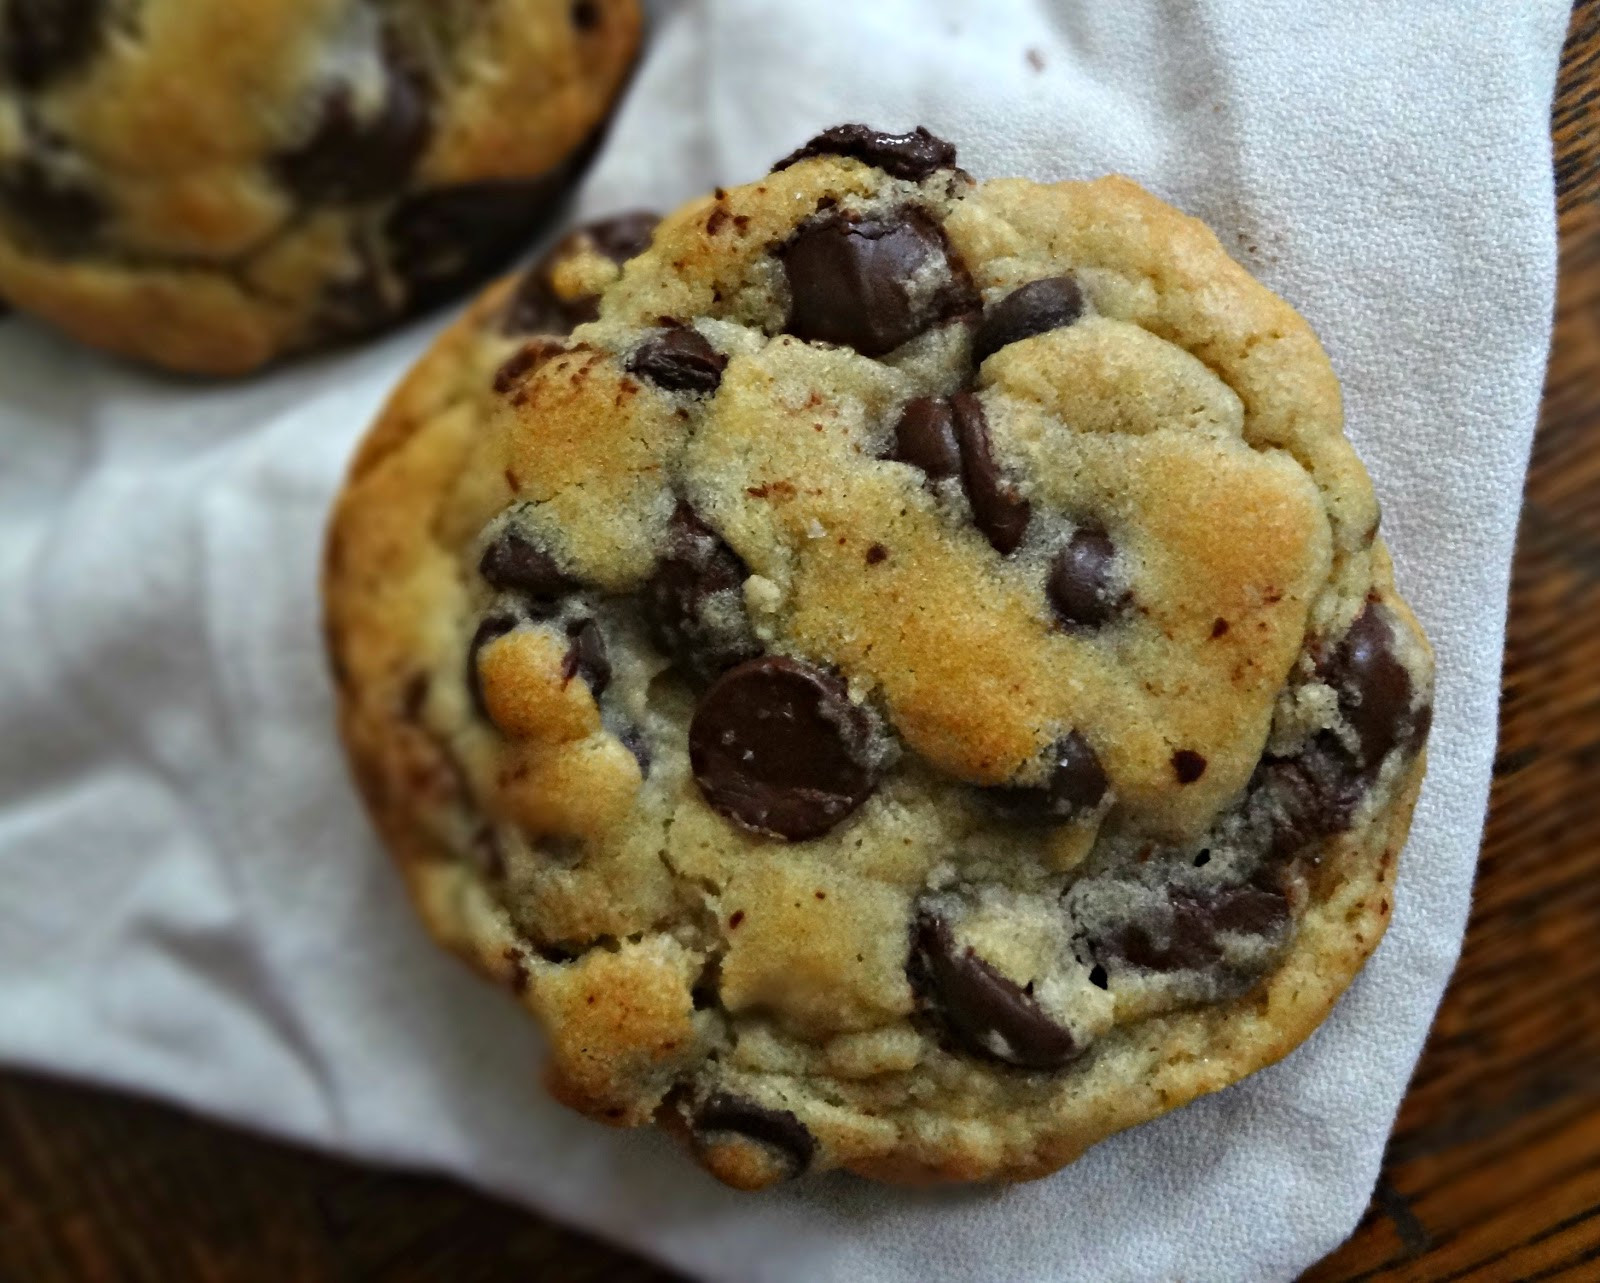 Nyt Chocolate Chip Cookies
 The Cooking Actress The New York Times Best Chocolate